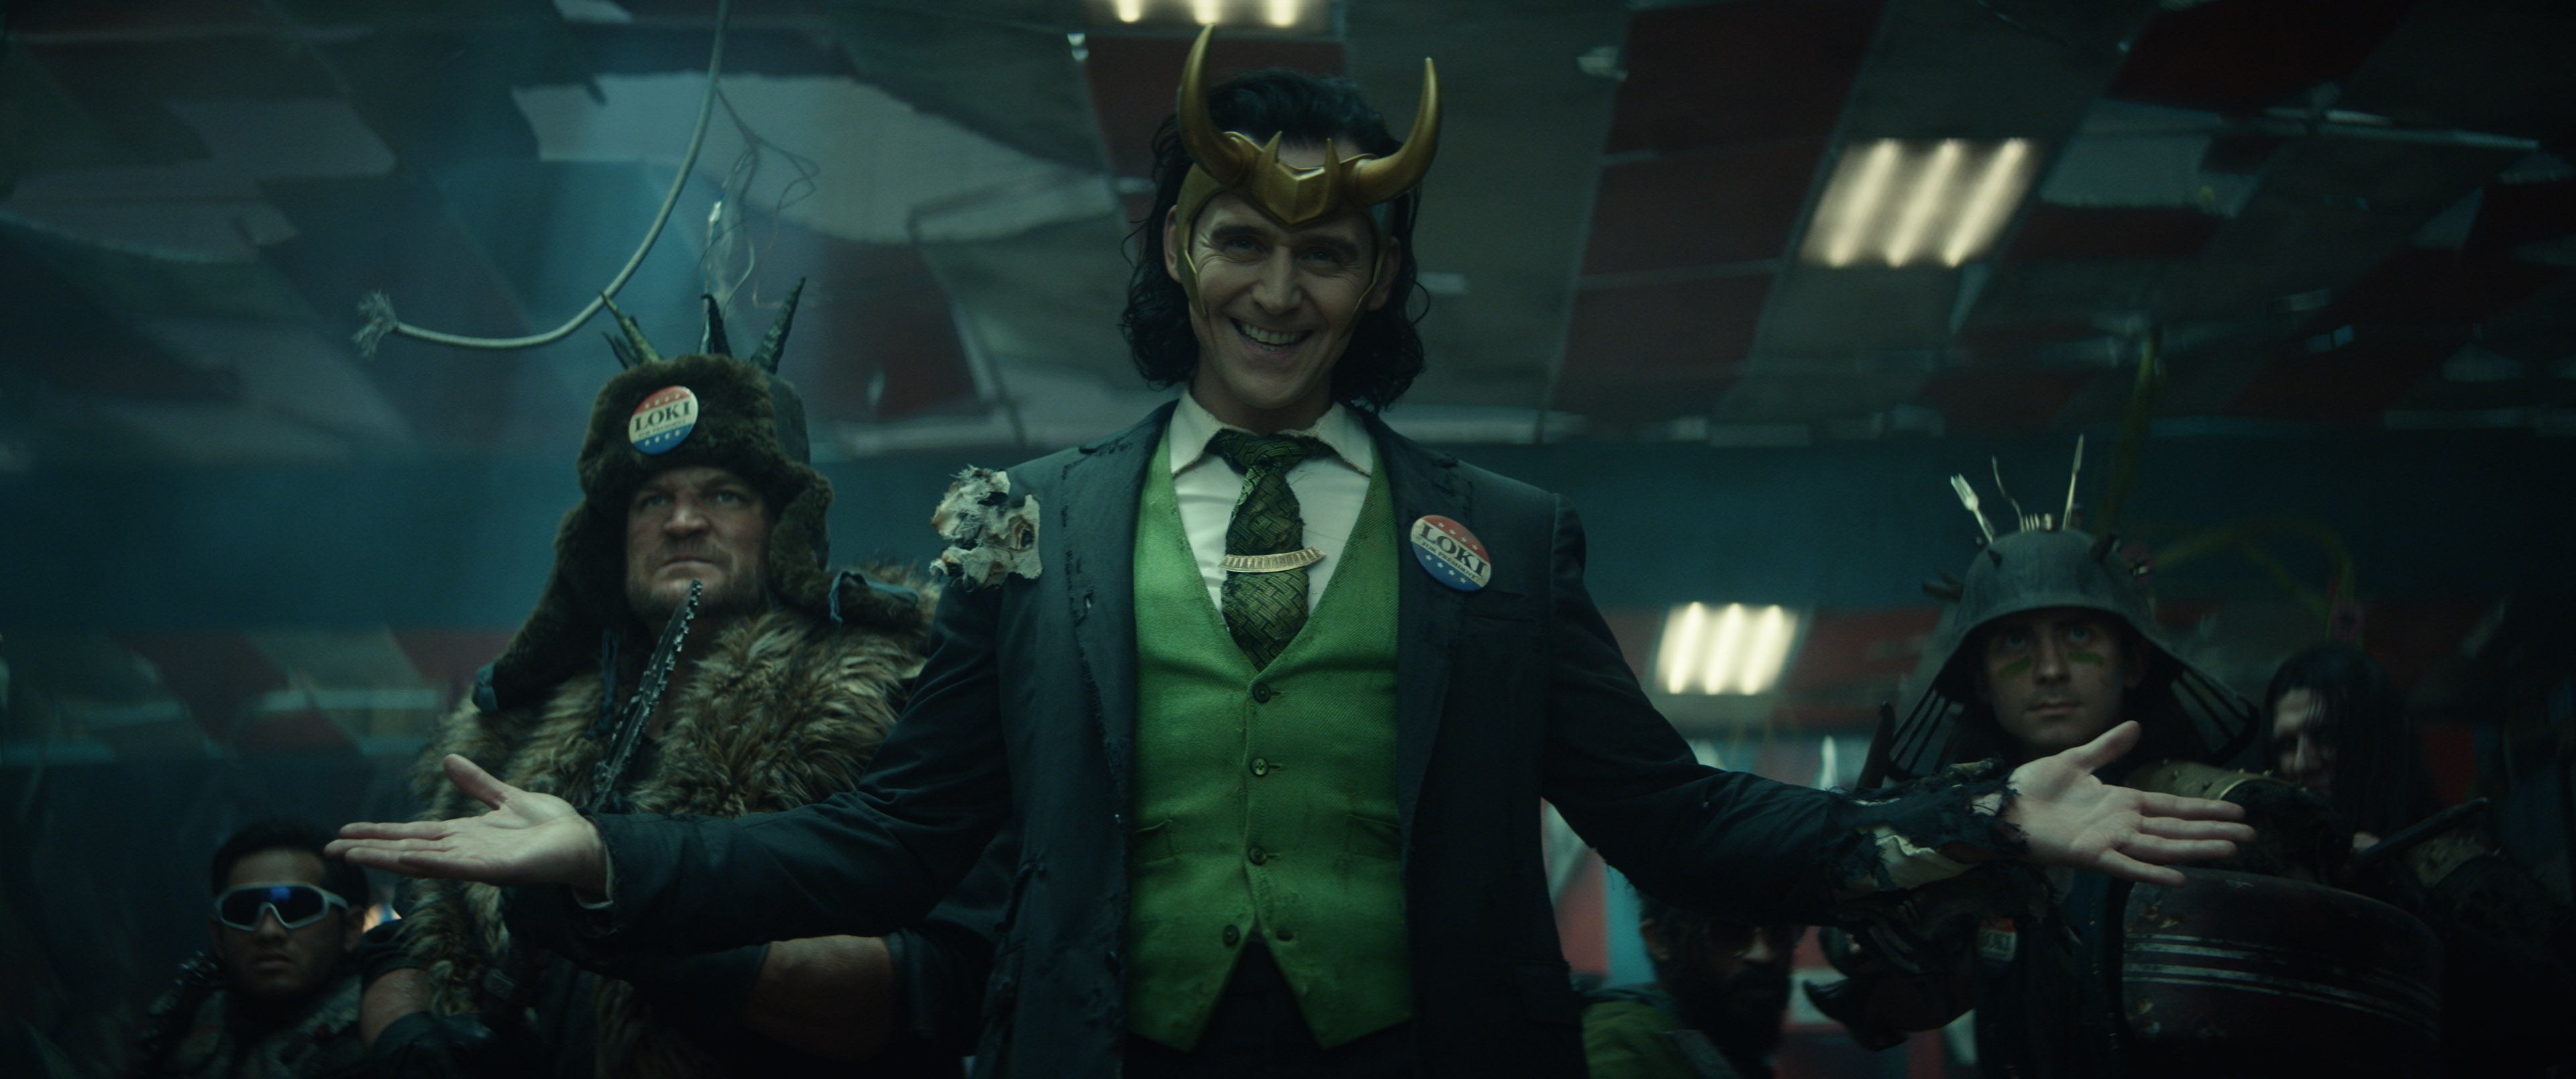 ‘Loki’ Gets Higher First-Day Viewership Than Any Other Marvel Title on Disney+